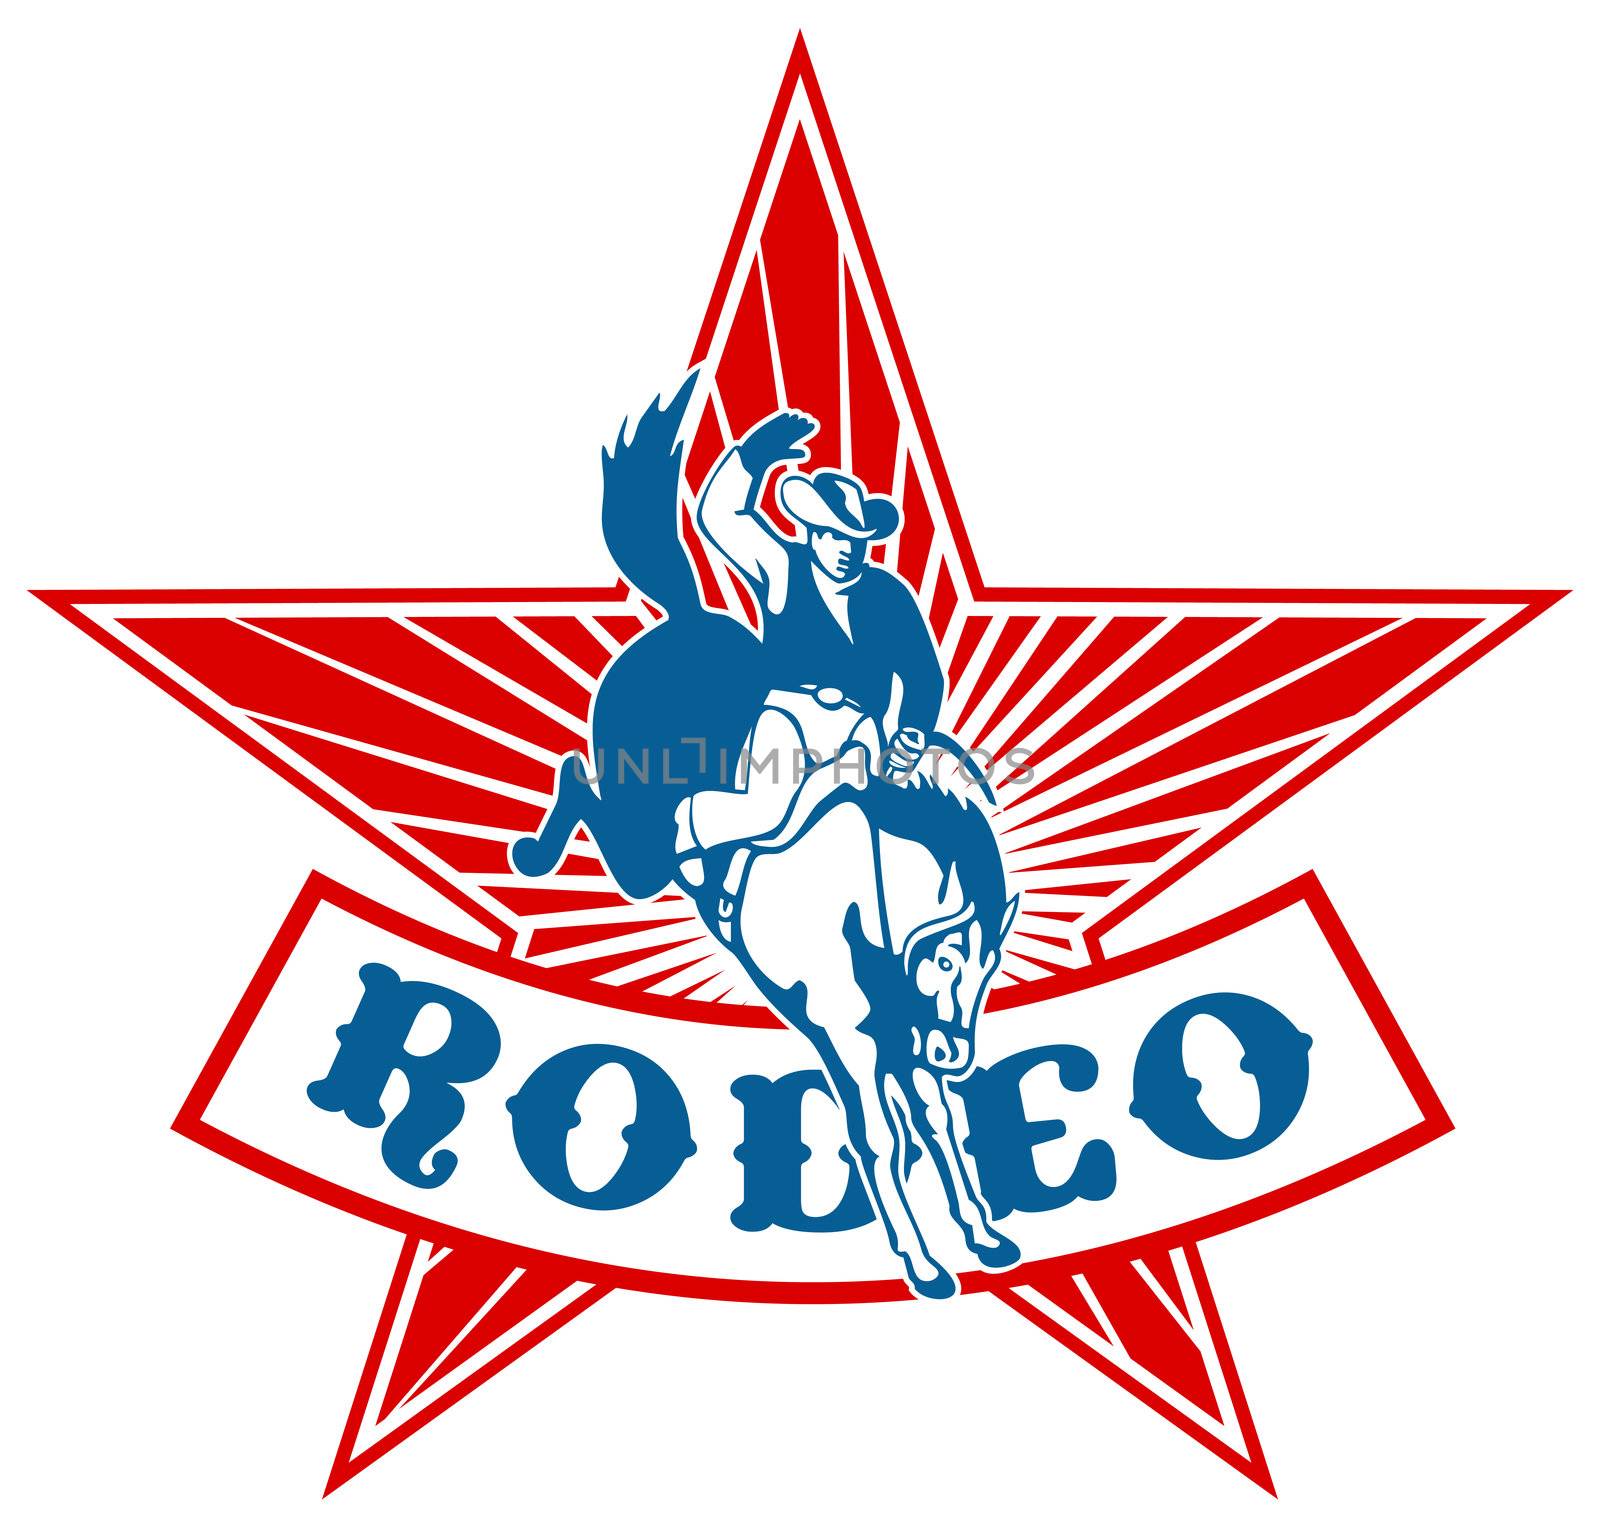 retro style illustration of an American  Rodeo Cowboy riding  a bucking bronco horse jumping with star and sunburst in background and scroll with words "rodeo"